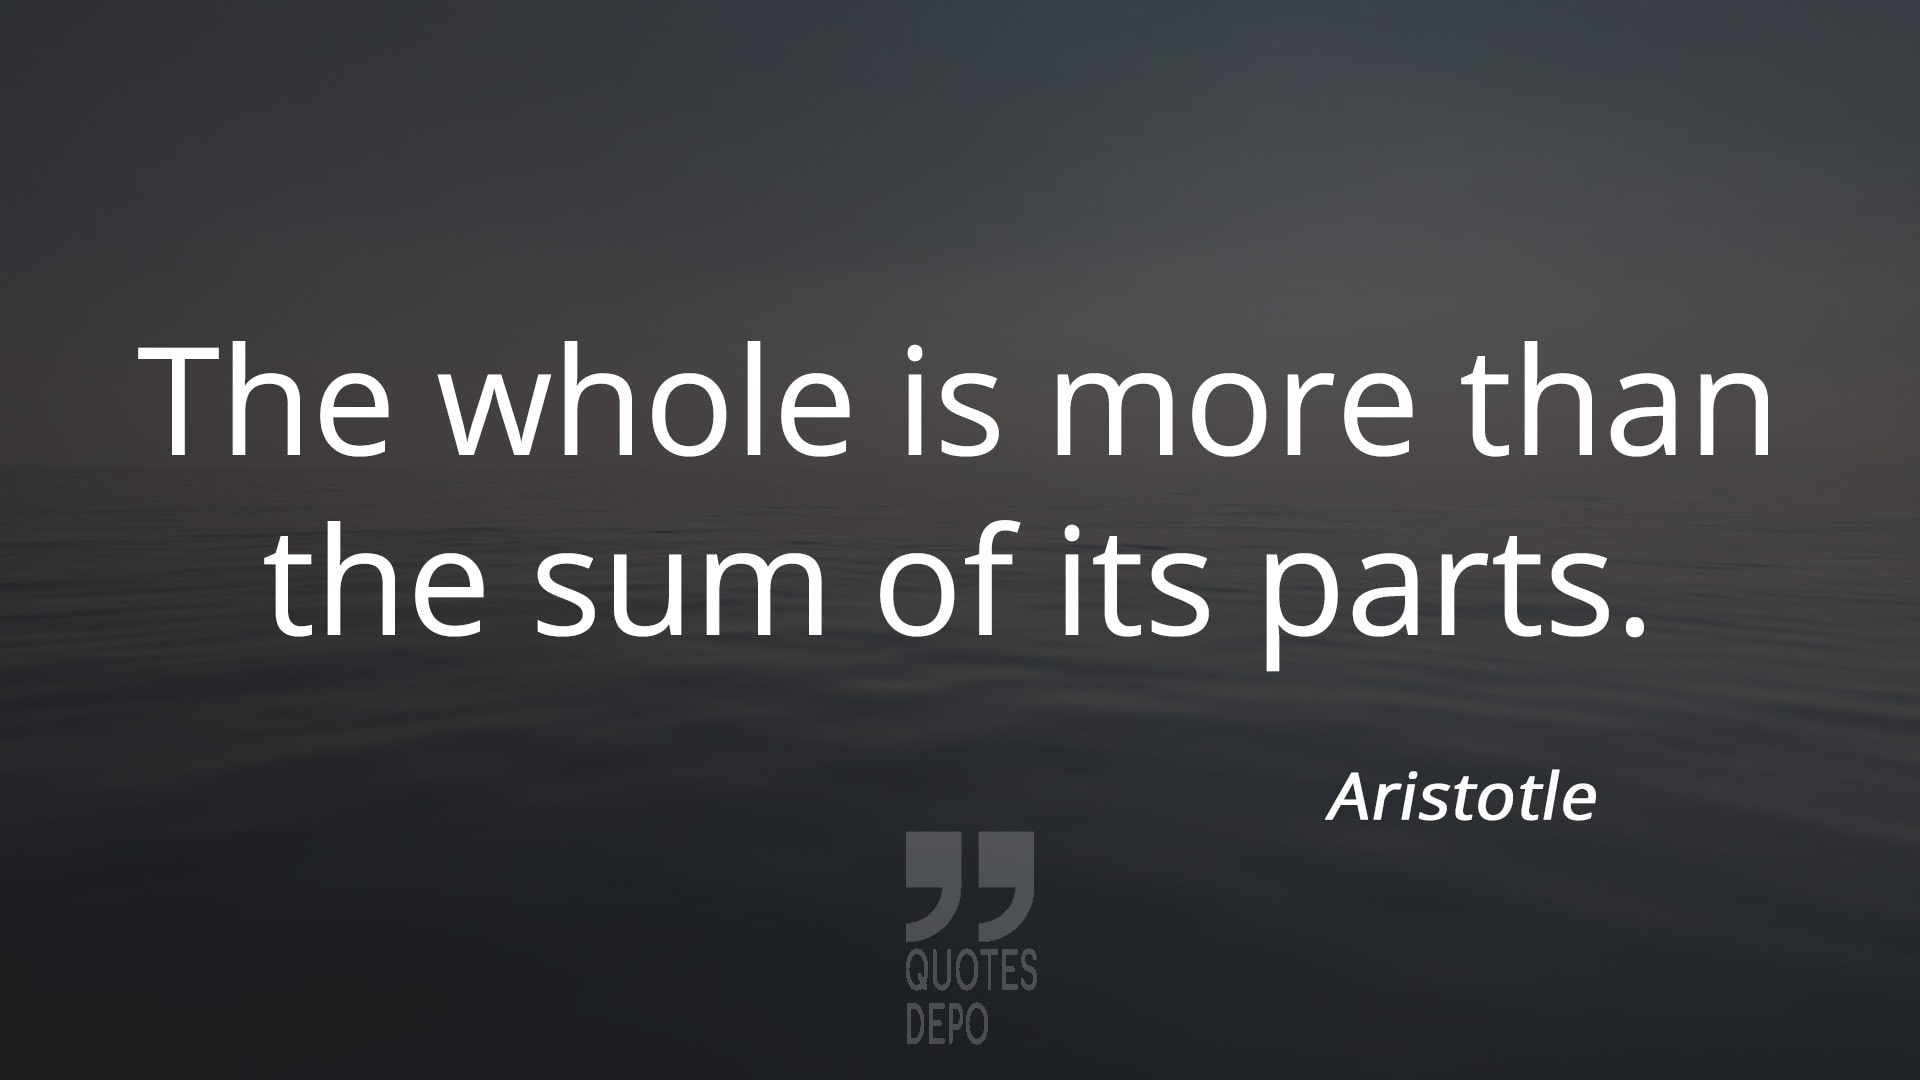 the whole is more than the sum of its parts - aristotle quotes